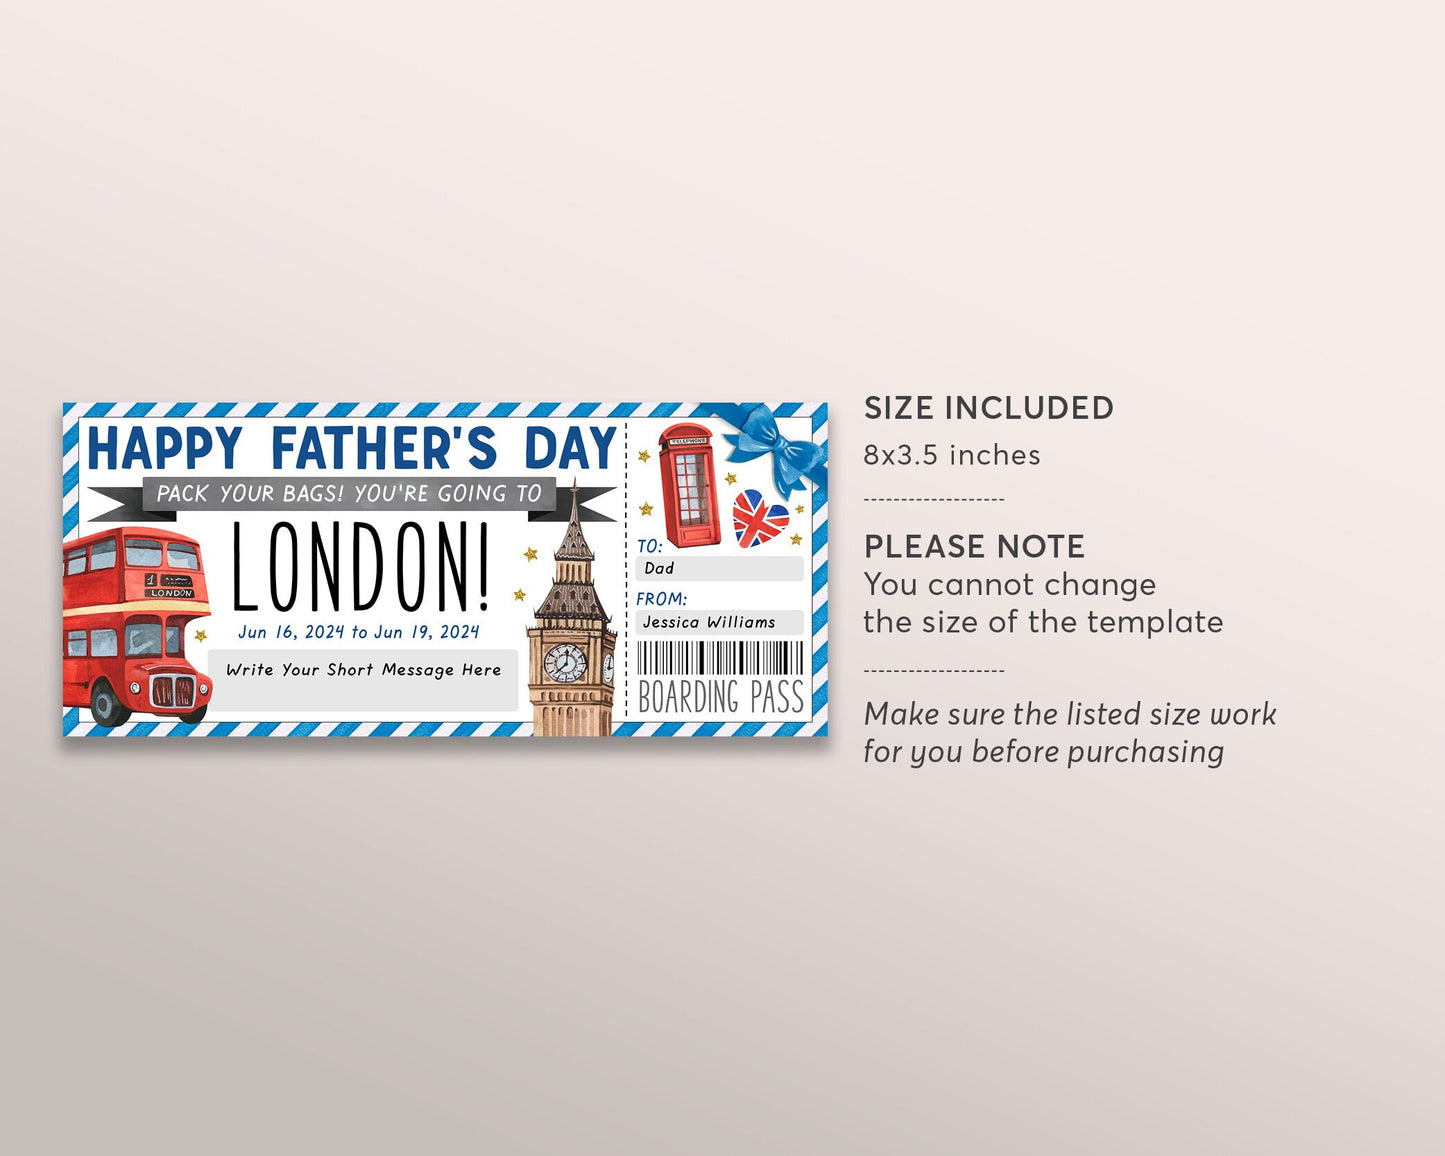 Fathers Day London Gift Ticket Boarding Pass Editable Template, Surprise Travel Vacation Plane Ticket Certificate For Dad England Trip